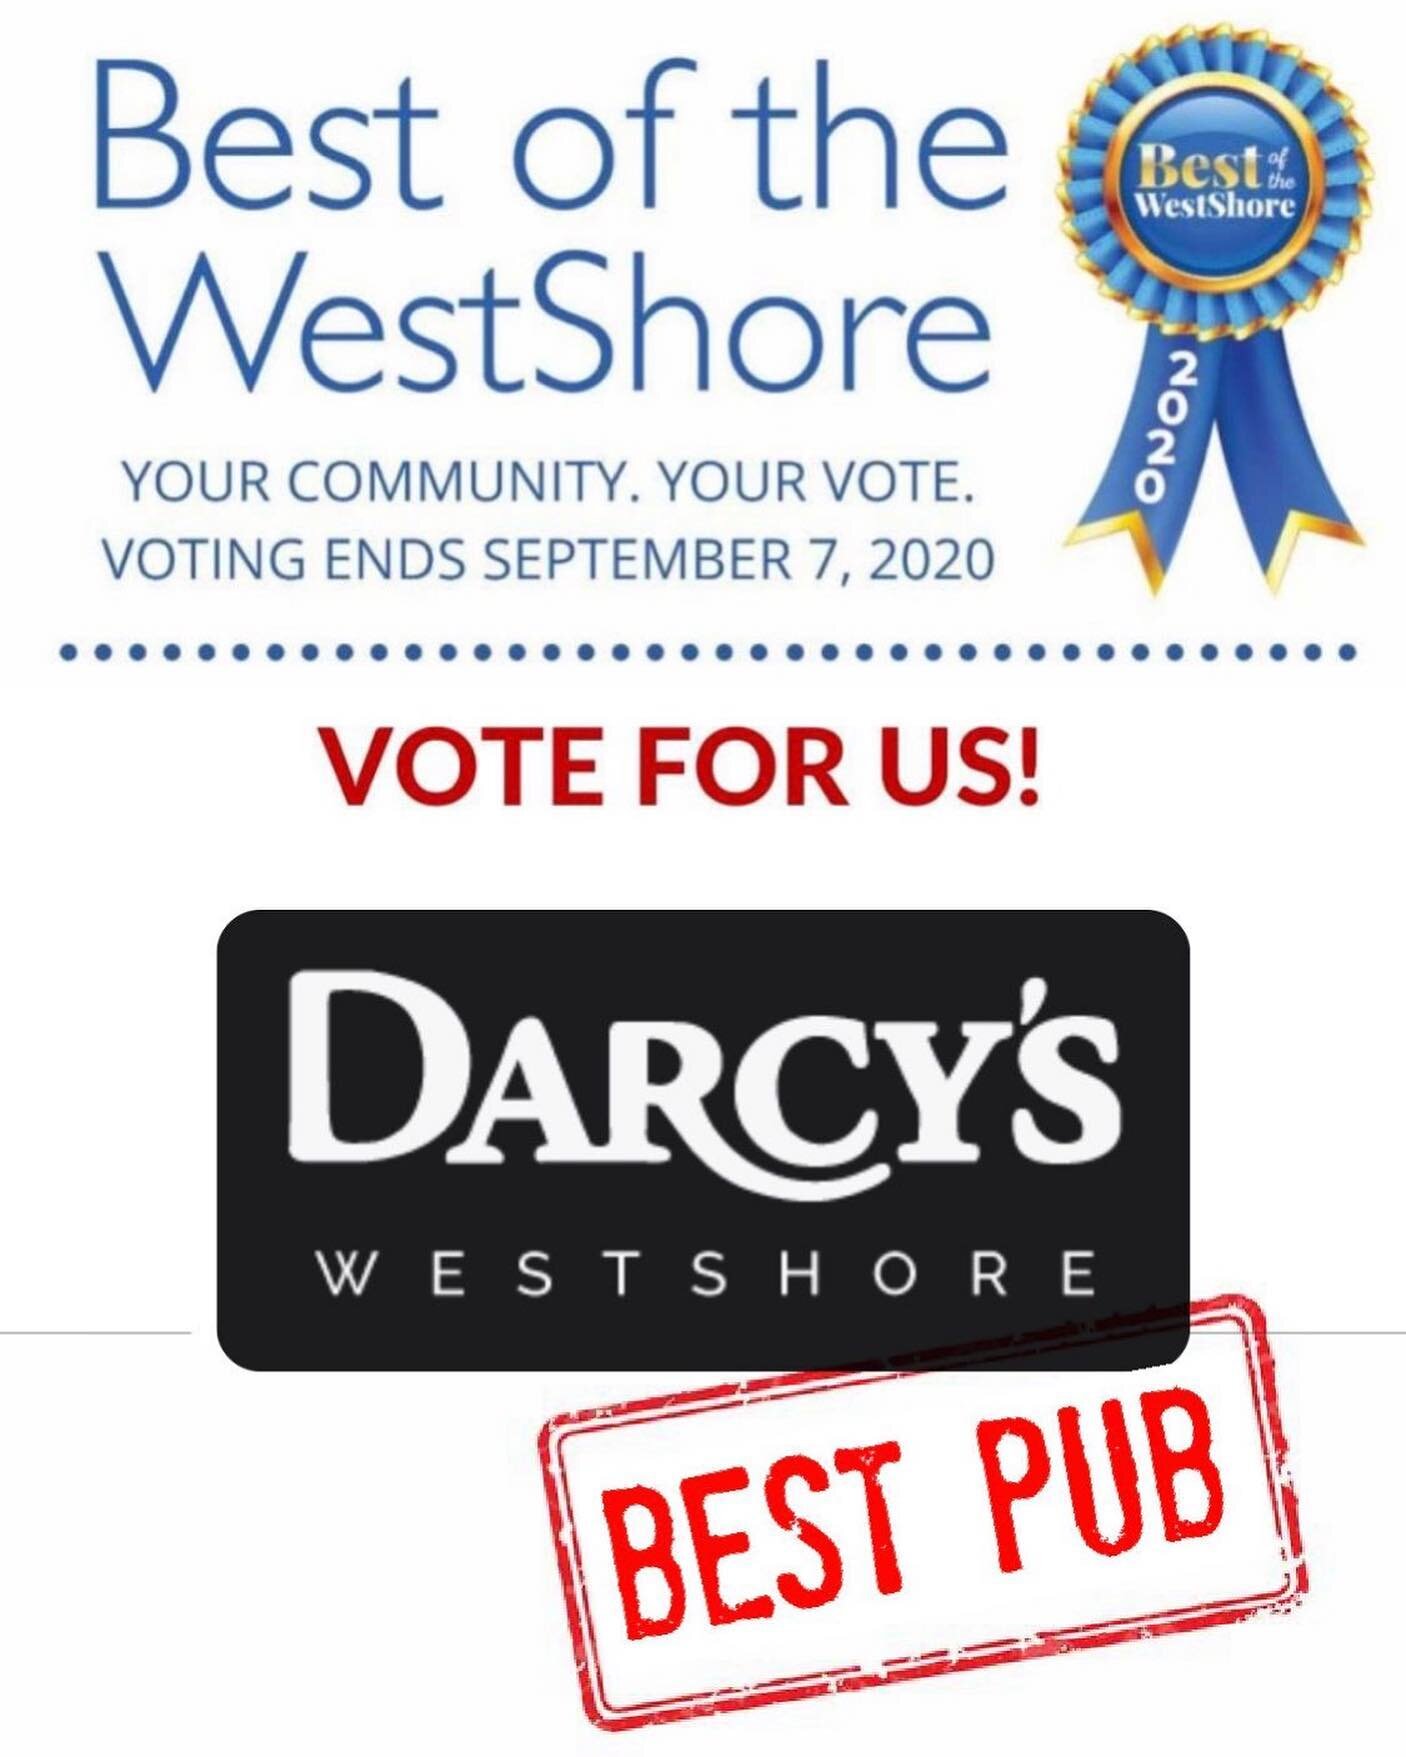 Have you cast your vote for the Best of the Westshore? 🗳
👋 Pick us for Best Pub !!
⬆️LINK IN BIO 
Make sure to fill out your ballot with all of your favourite local businesses ⁉️
Voting ends September 7th ⏰

#bestofwestshore #bestofwestshore2020 #b